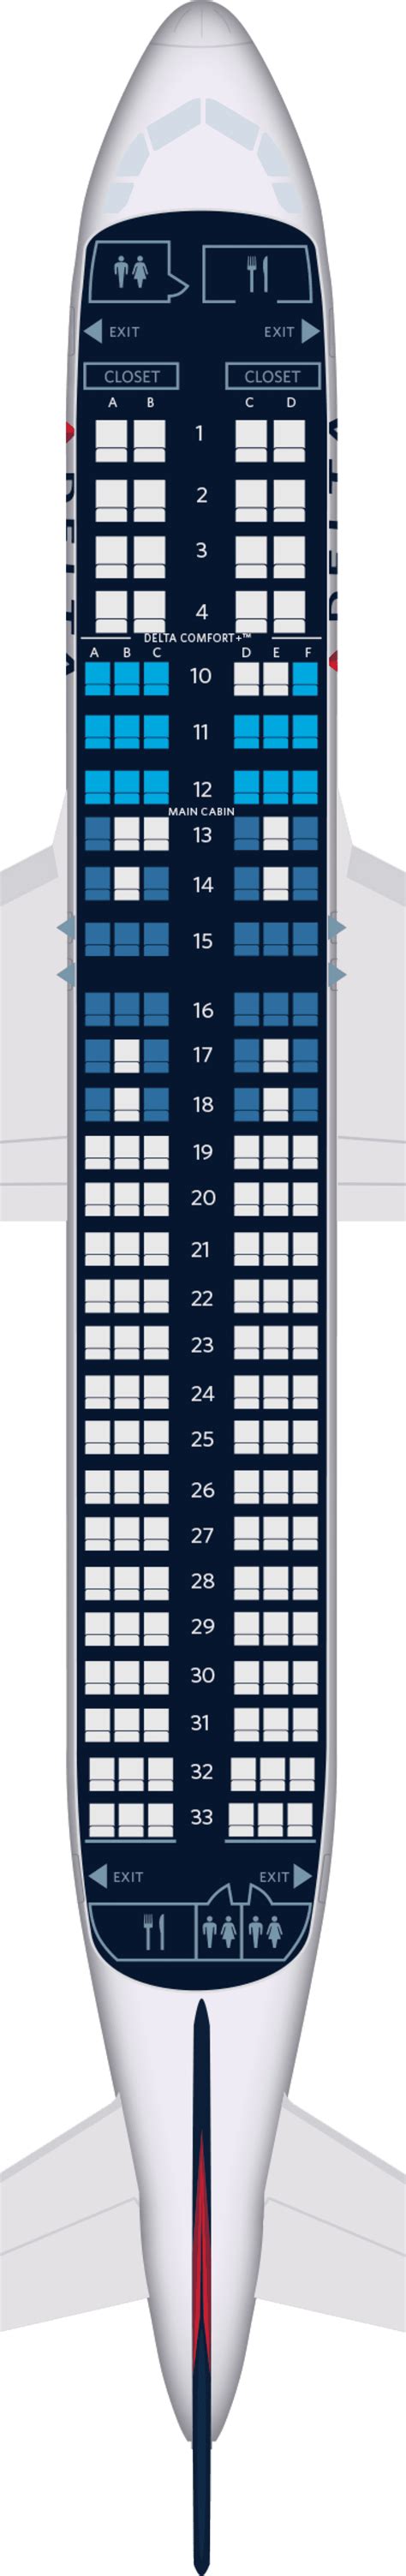 Airbus a320 aircraft seating. The Delta Airbus A320 aircraft is operated on short-haul routes. This A320 features a three class configuration with 16 First Class seats, 18 Delta Comfort + seats with up to an added 3" of seat pitch, and 123 standard Economy Class seats. 